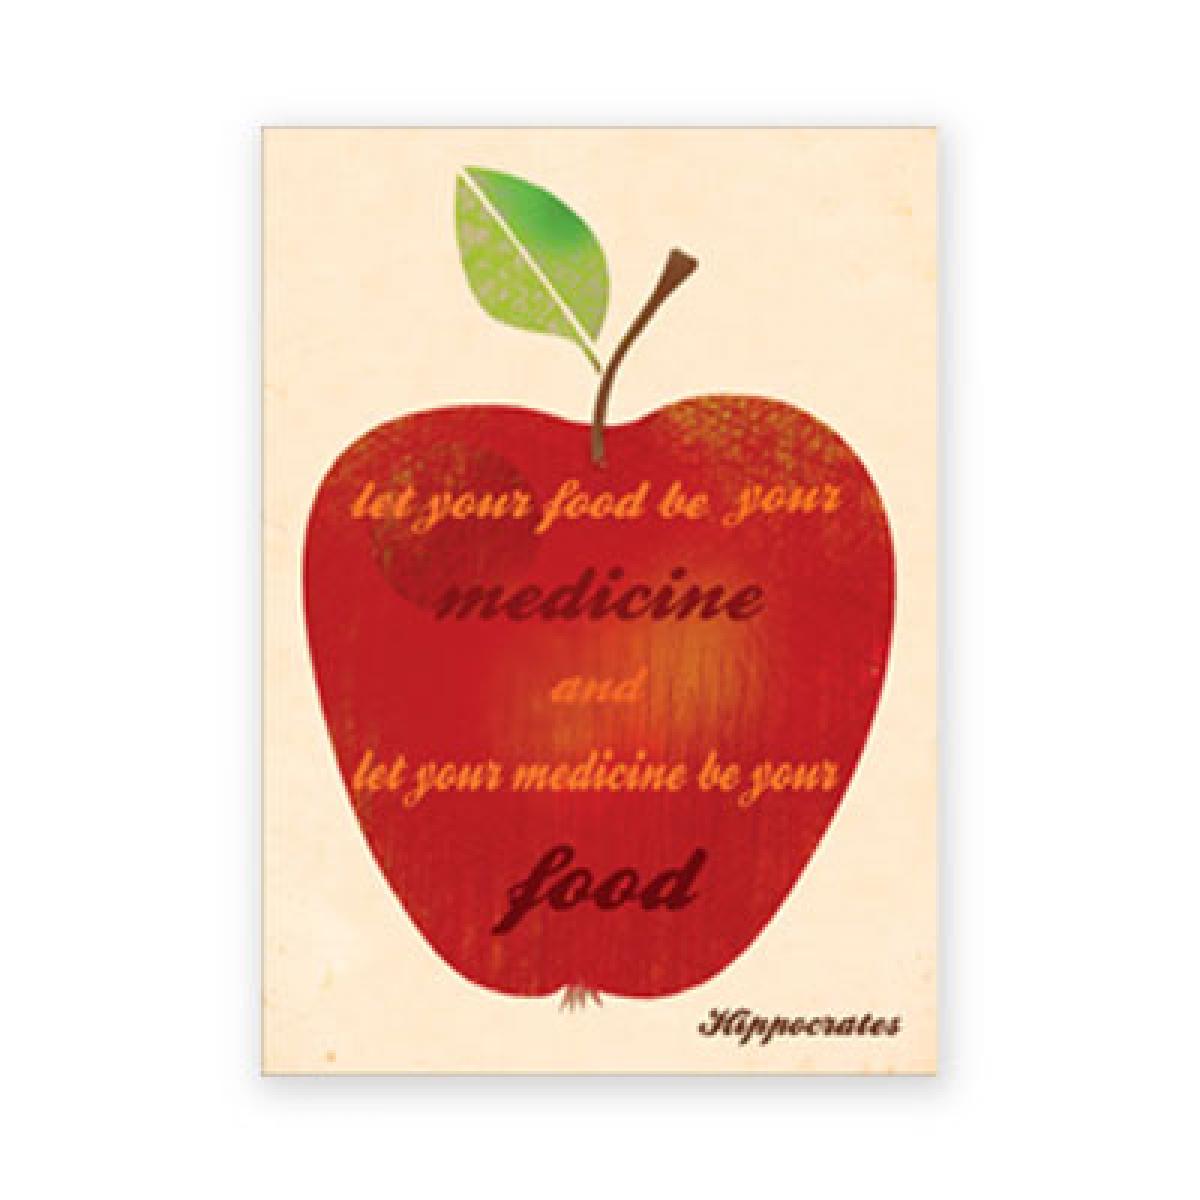 Postkarte: let your food be your medicine